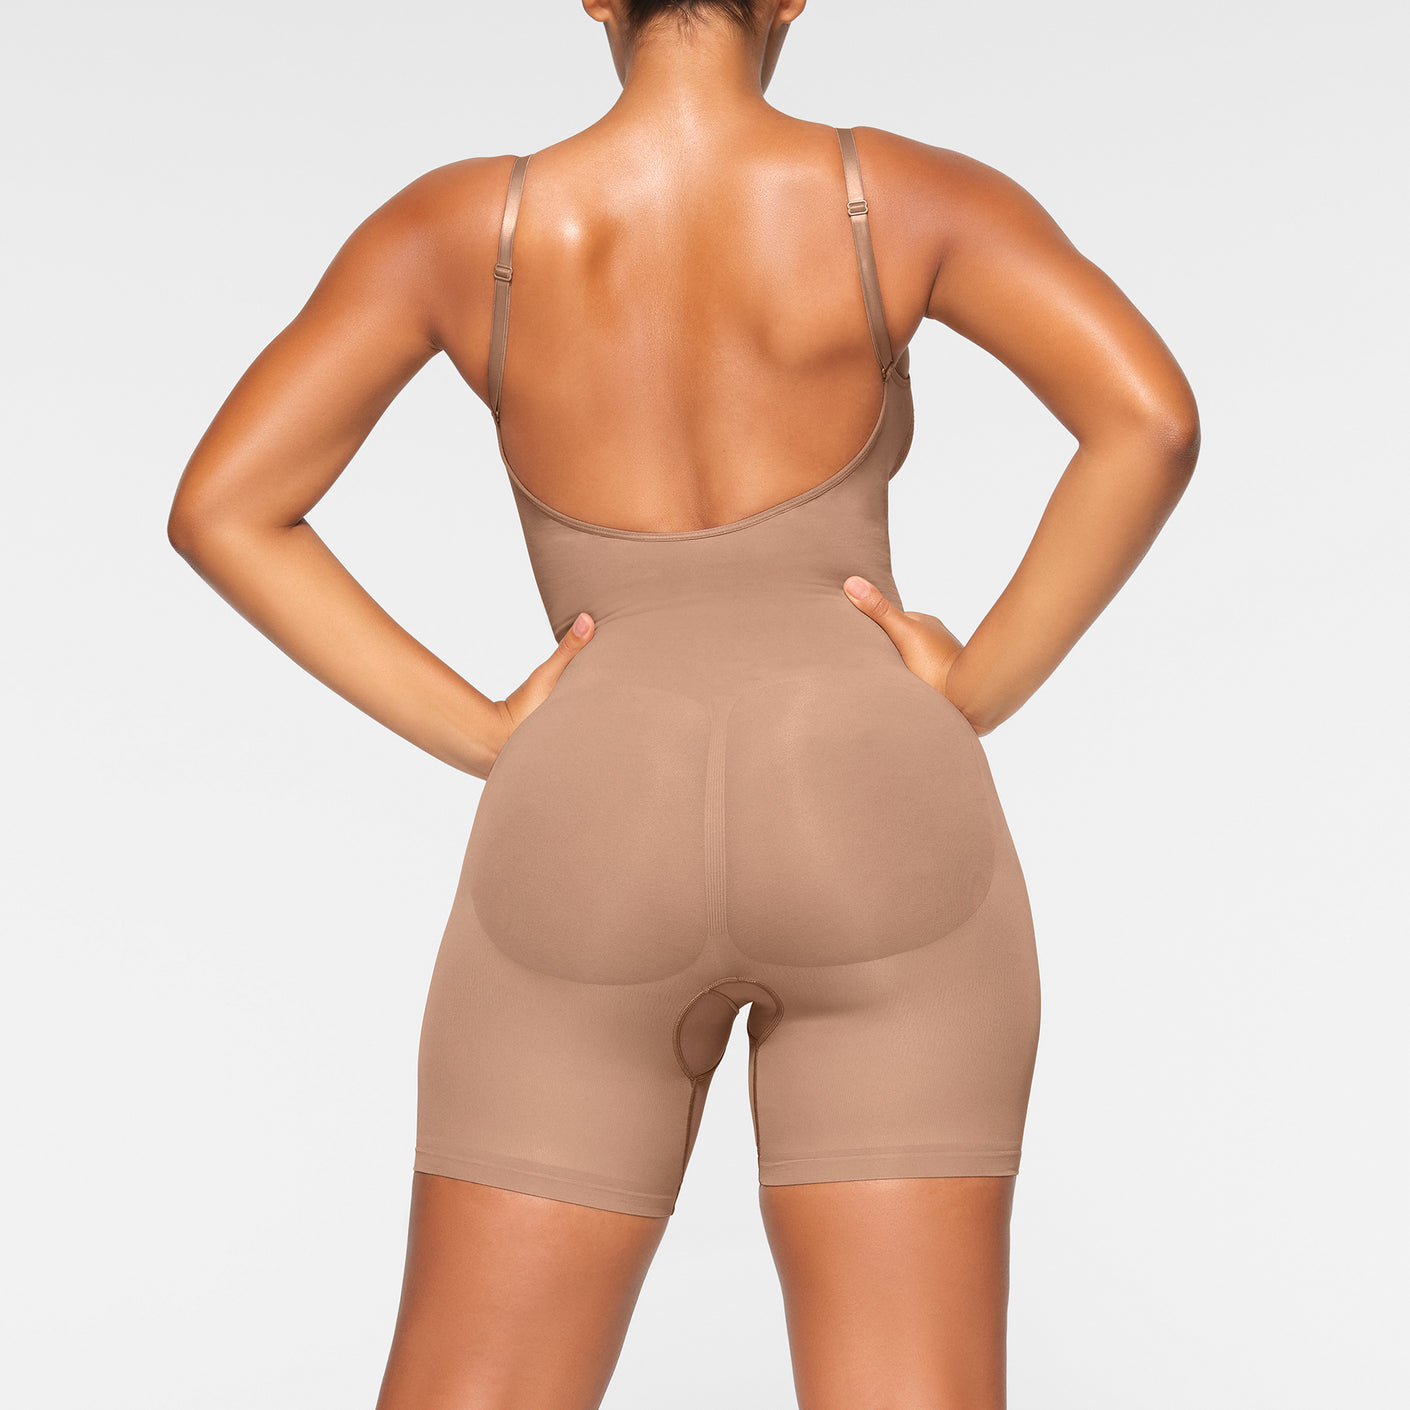 SKIMS - BACK IN STOCK: the Sculpting Bodysuit Mid Thigh